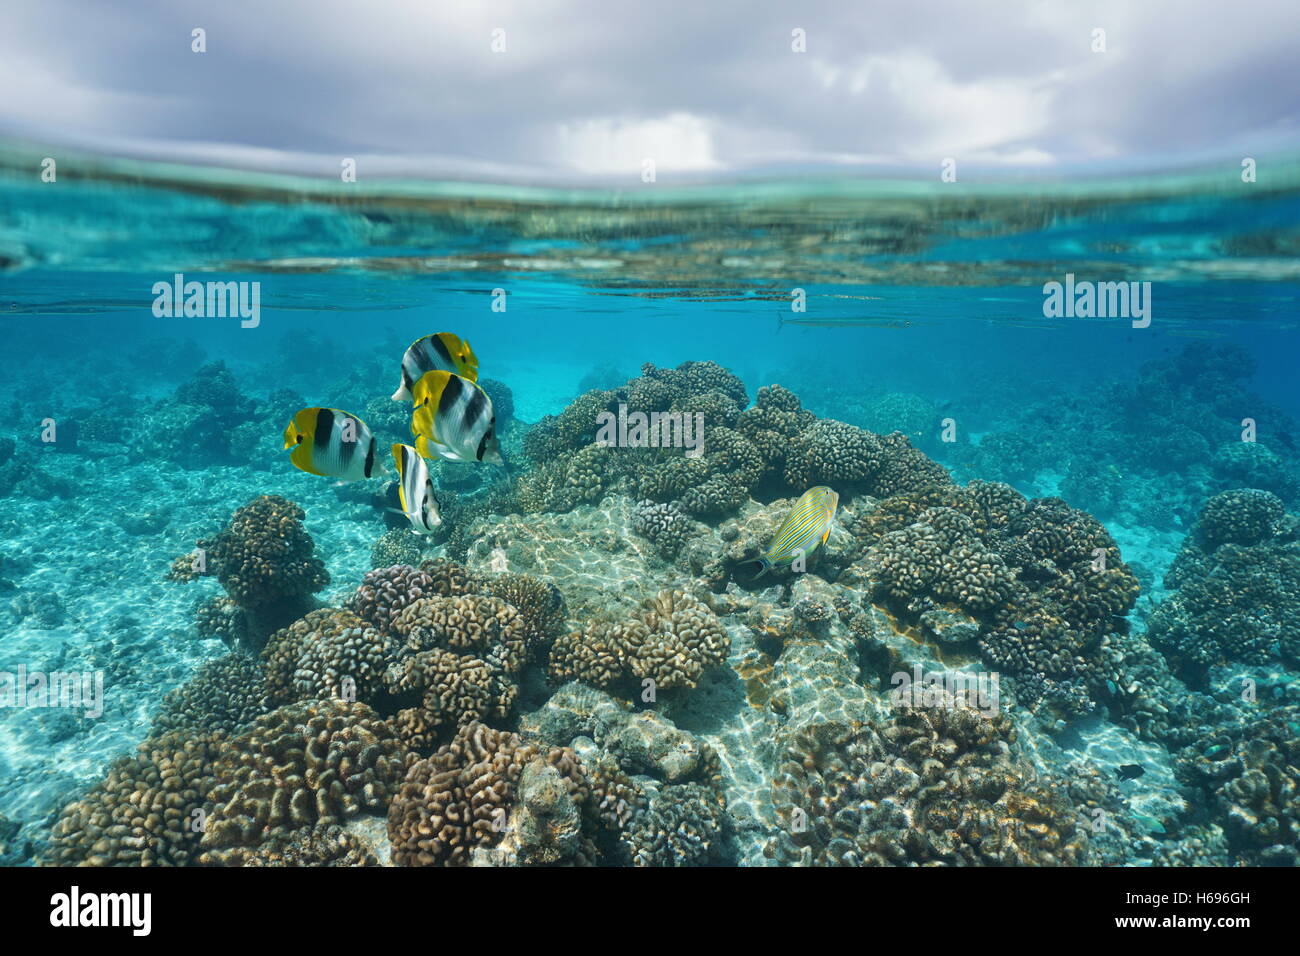 Shallow coral reef with tropical fish underwater and cloudy sky split by waterline, Rangiroa, Pacific ocean, French Polynesia Stock Photo